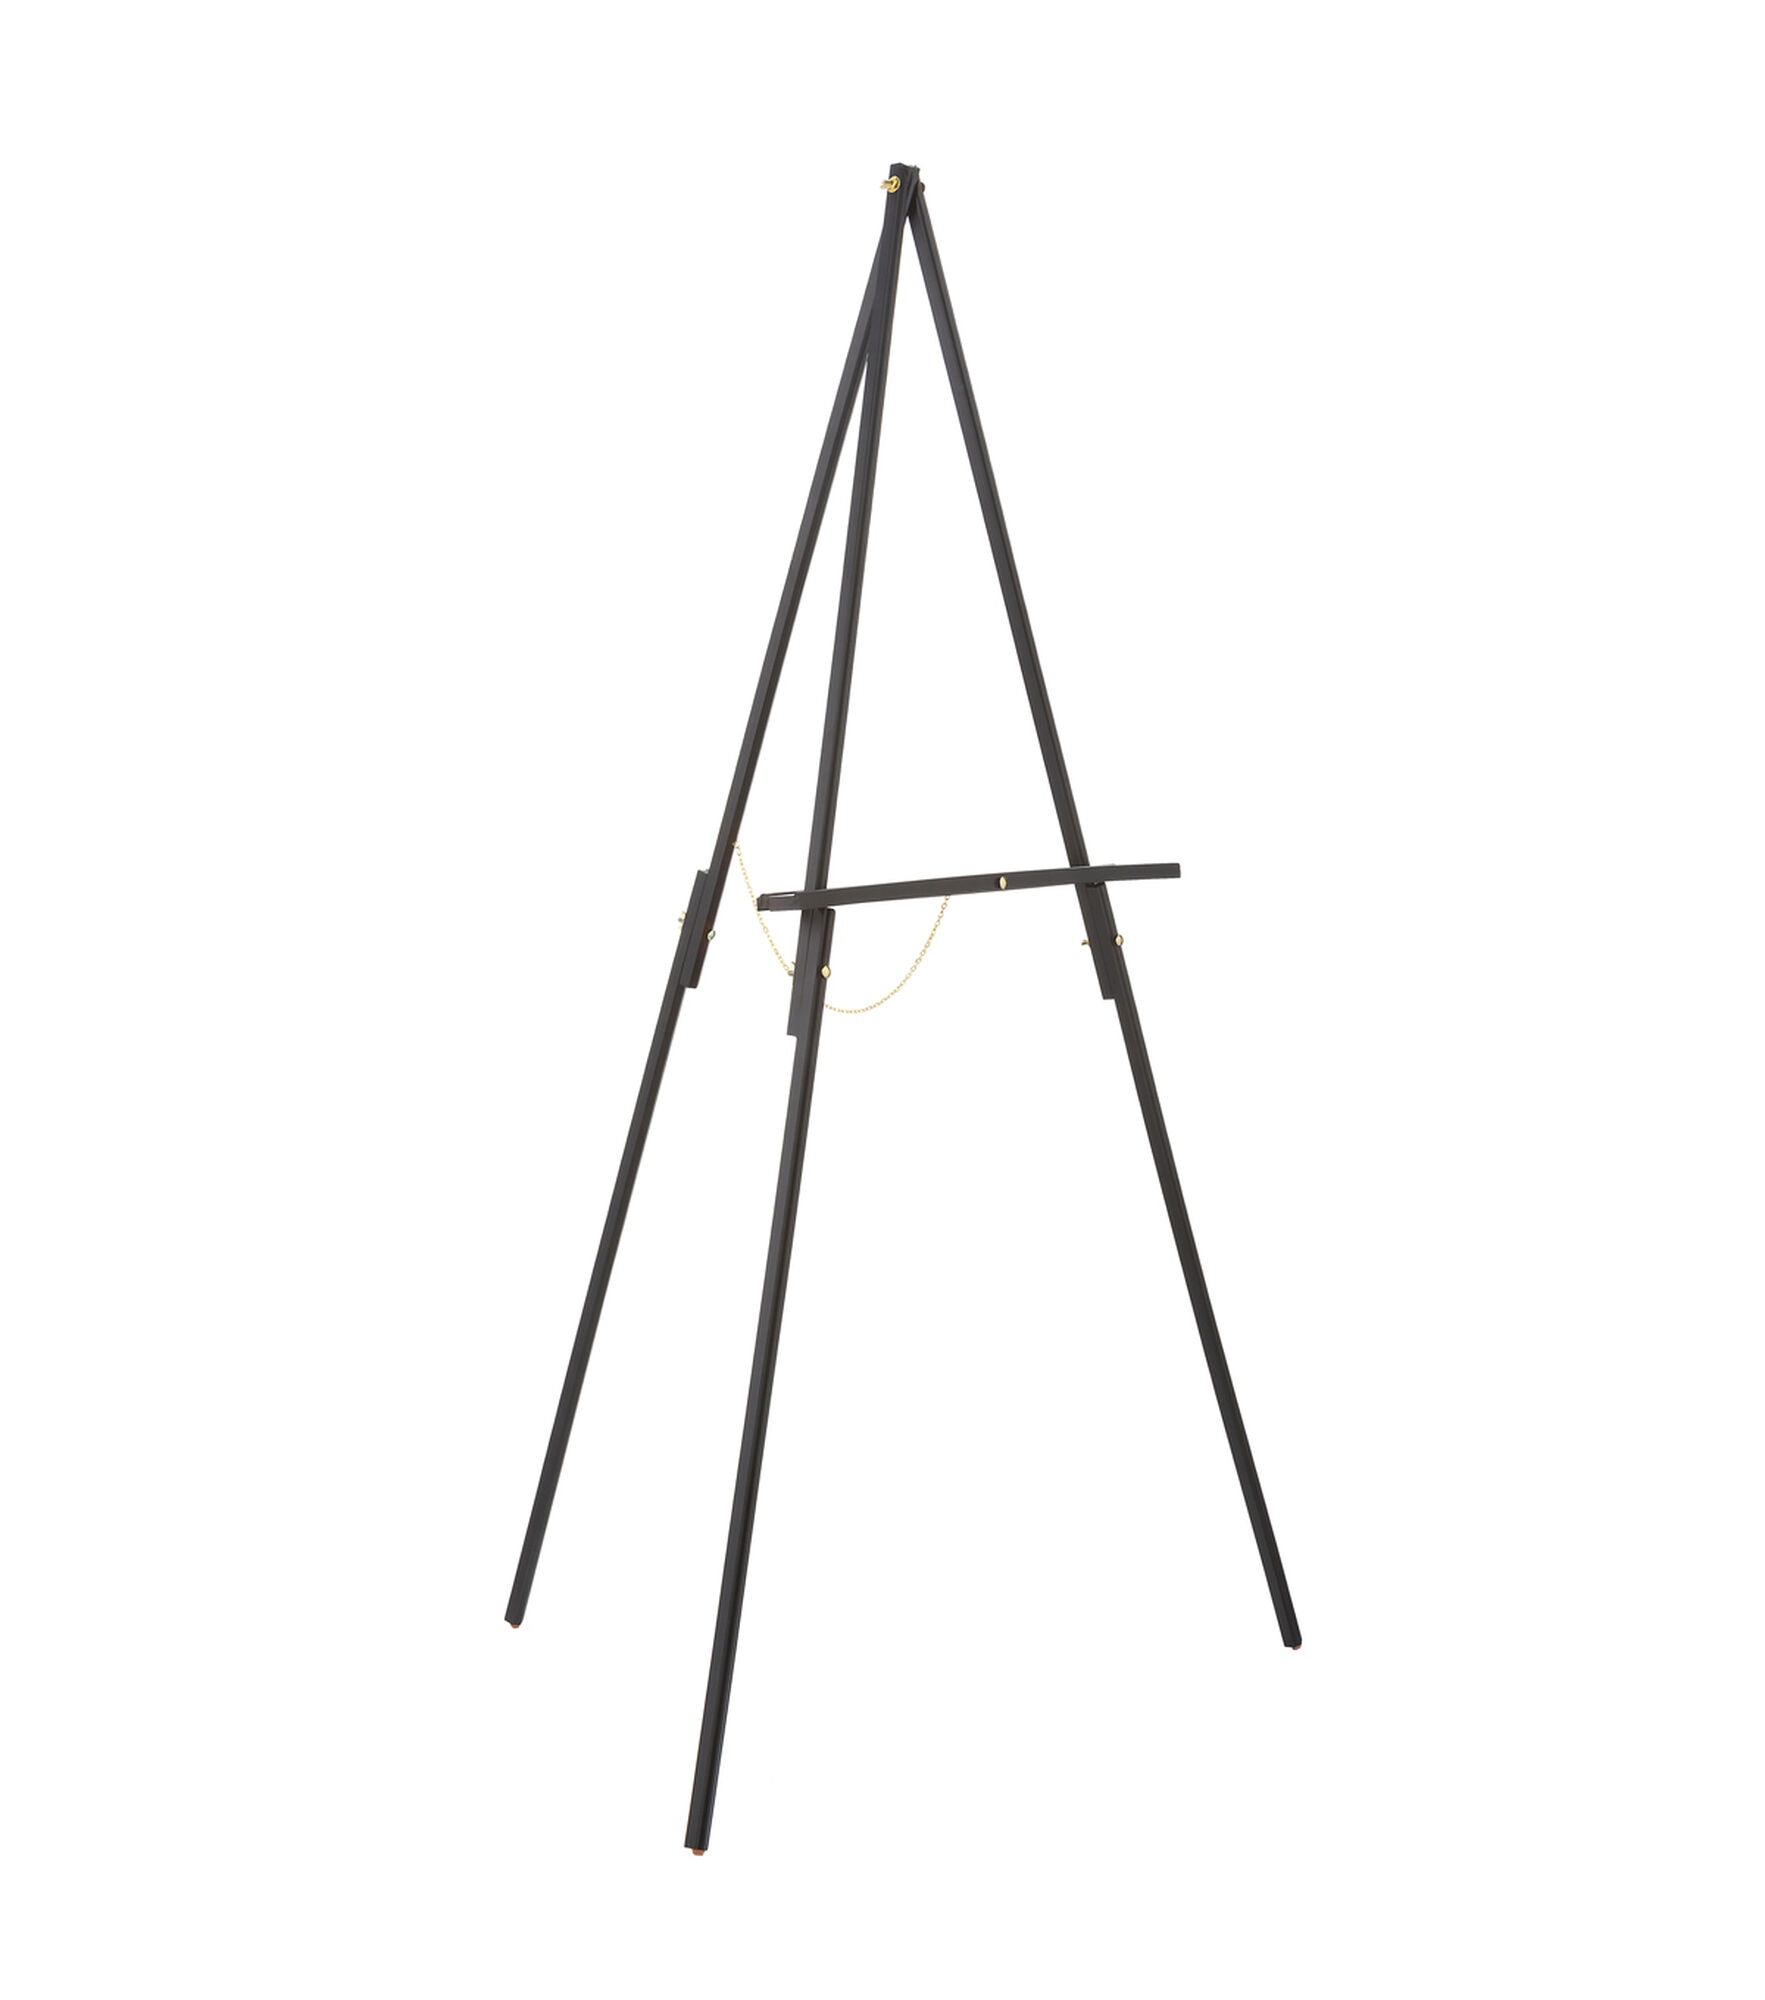 U.S. Art Supply 8 inch x 8 inch Stretched Canvas with 10.5 inch Tabletop Display Stand A-Frame Tripod Artist Easel Kit (Pack of 6), Beige